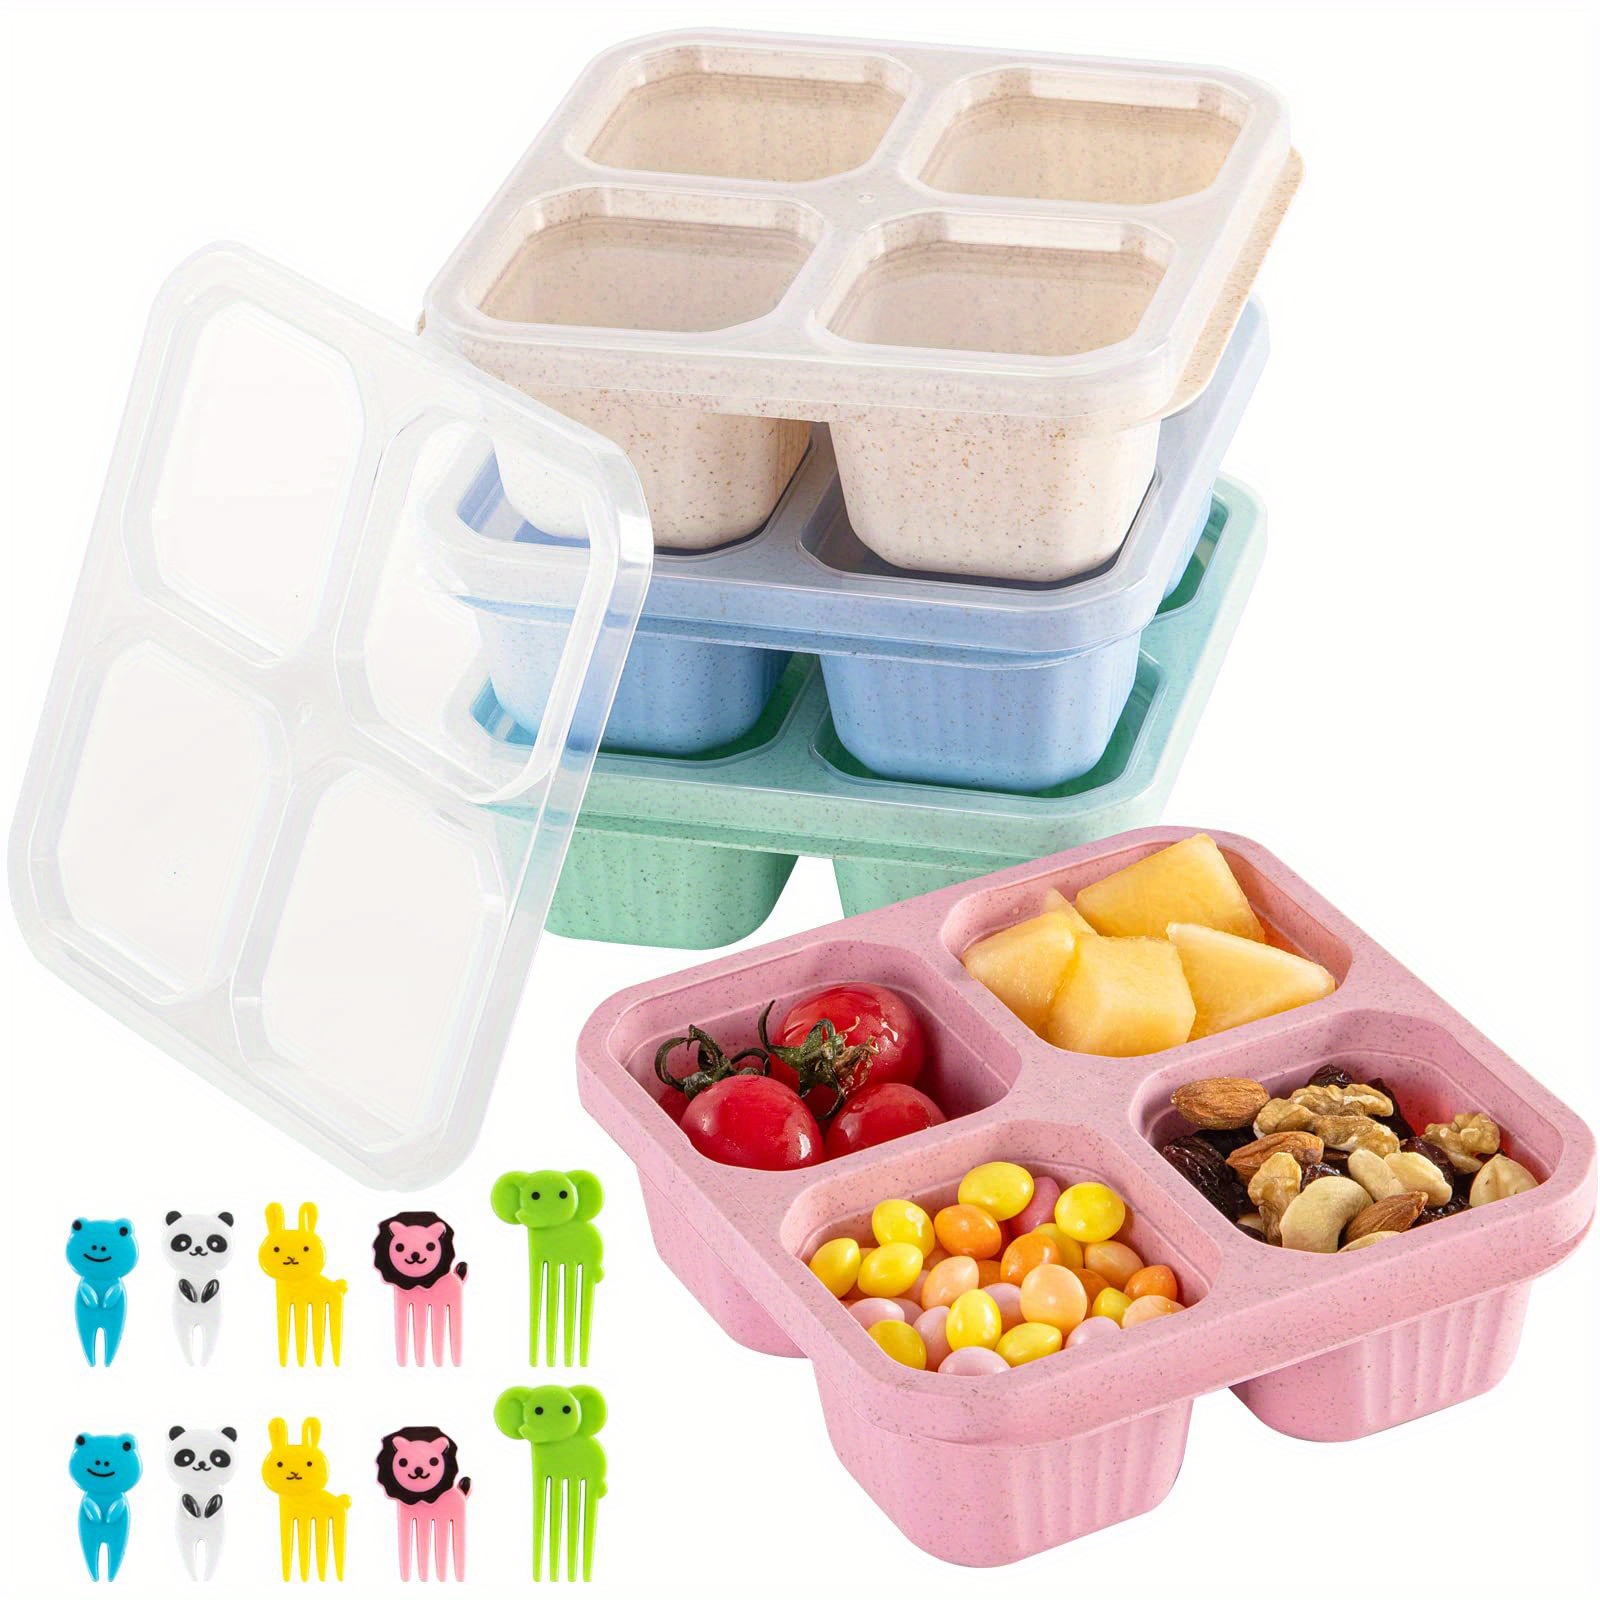 Kawaii BPA Free Plastic Lunch Box Bento Snack Food Container